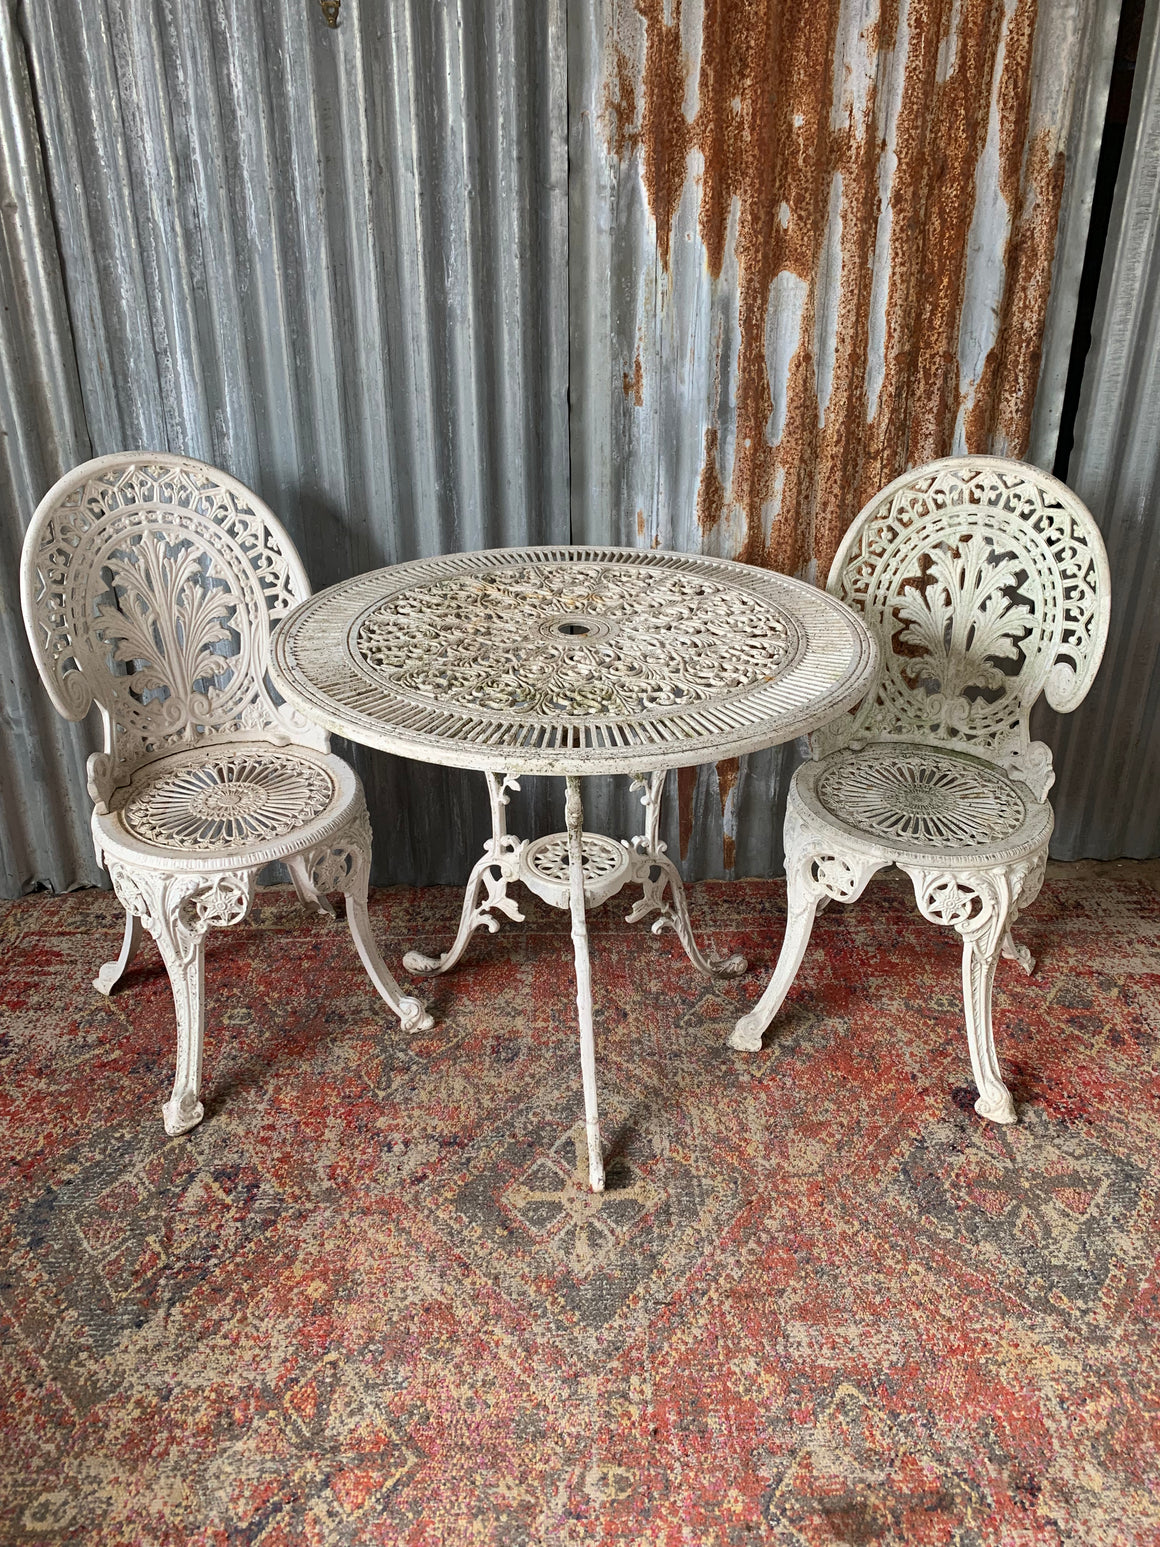 A white Victorian style table and two chairs garden set